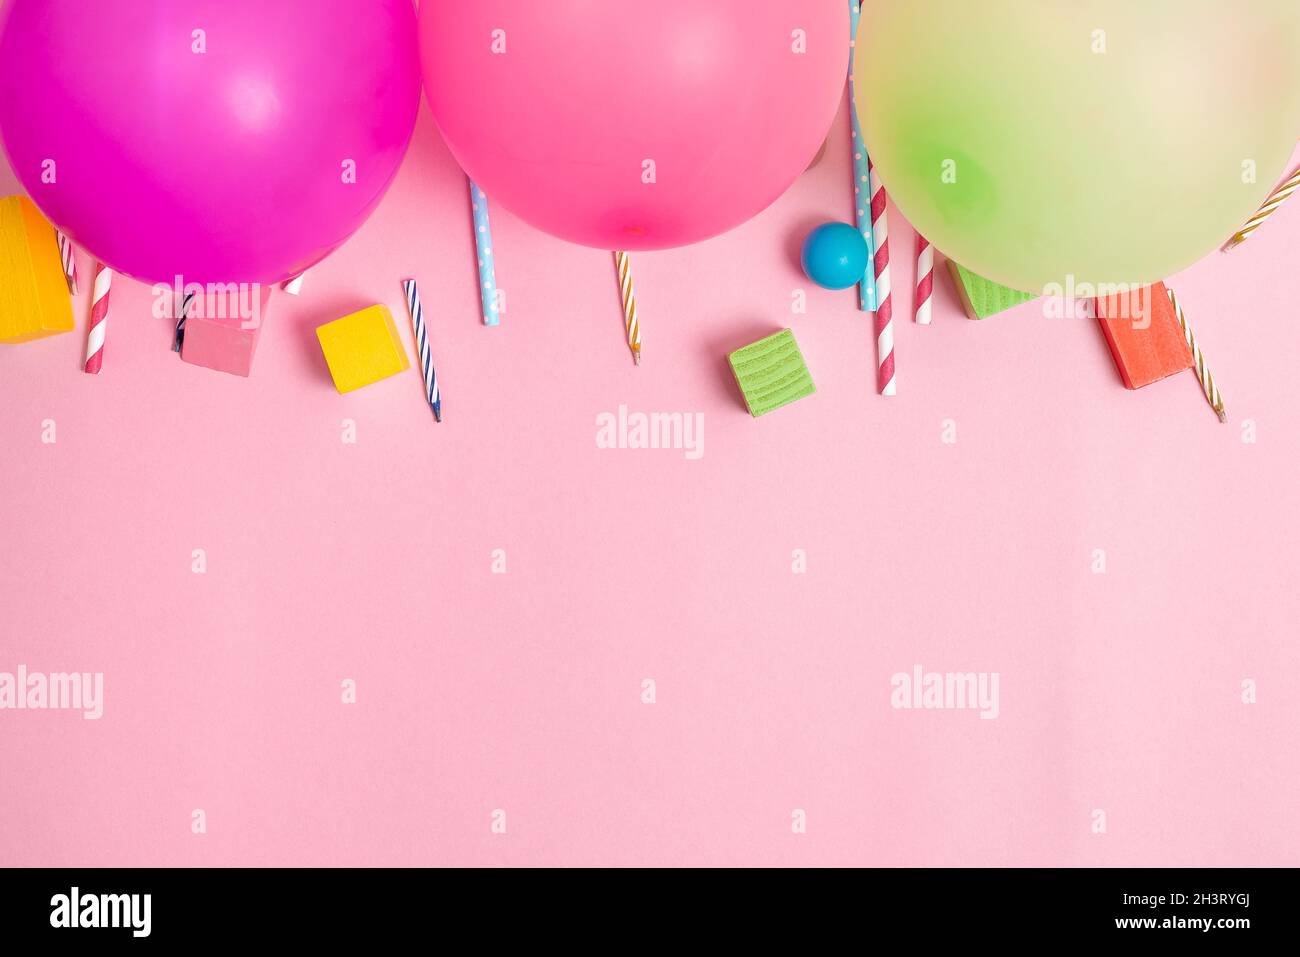 Colorful Birthday Party Designs Bright Celebration Planning Ideas New Flashy Decorations Balloon Confetti Candles Celebrate Fest Stock Photo